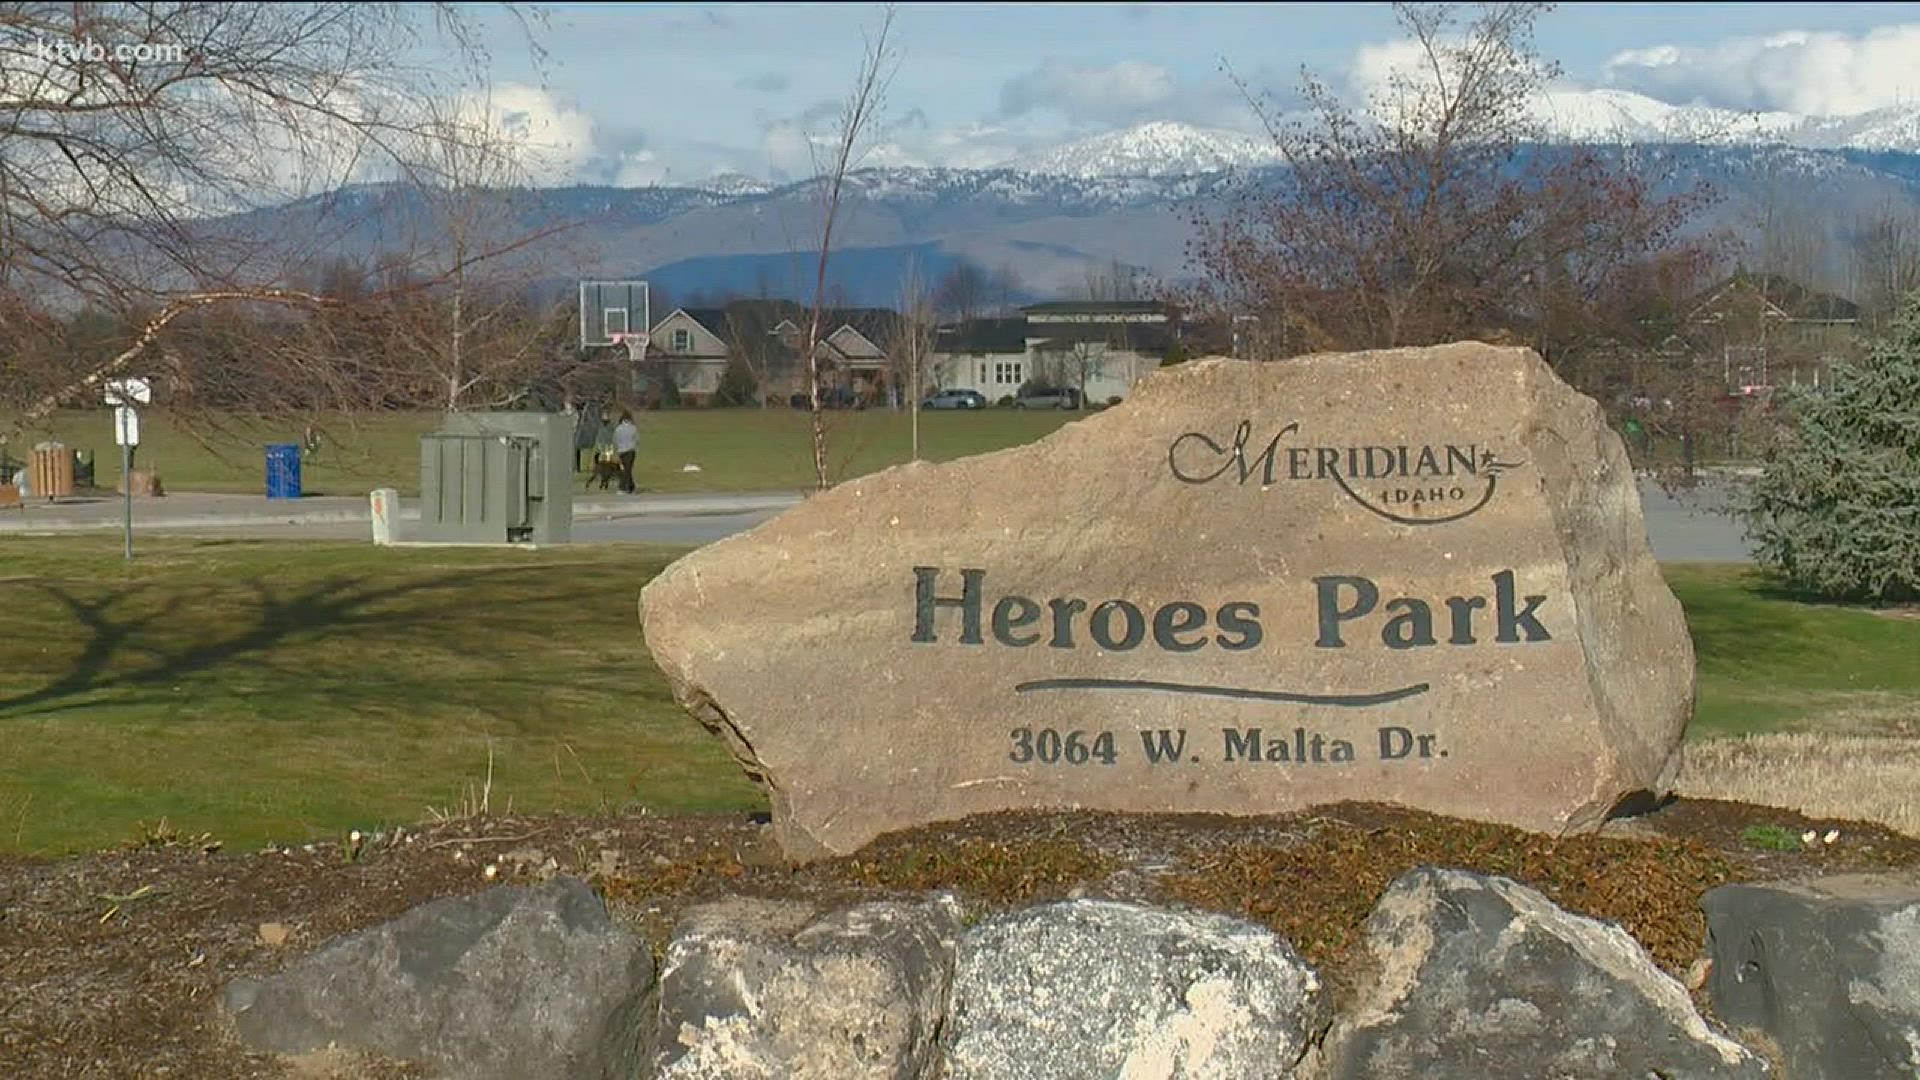 The art installation at Heroes Park in Meridian honors heroes, both local and national. The idea is recognize those who inspire others.